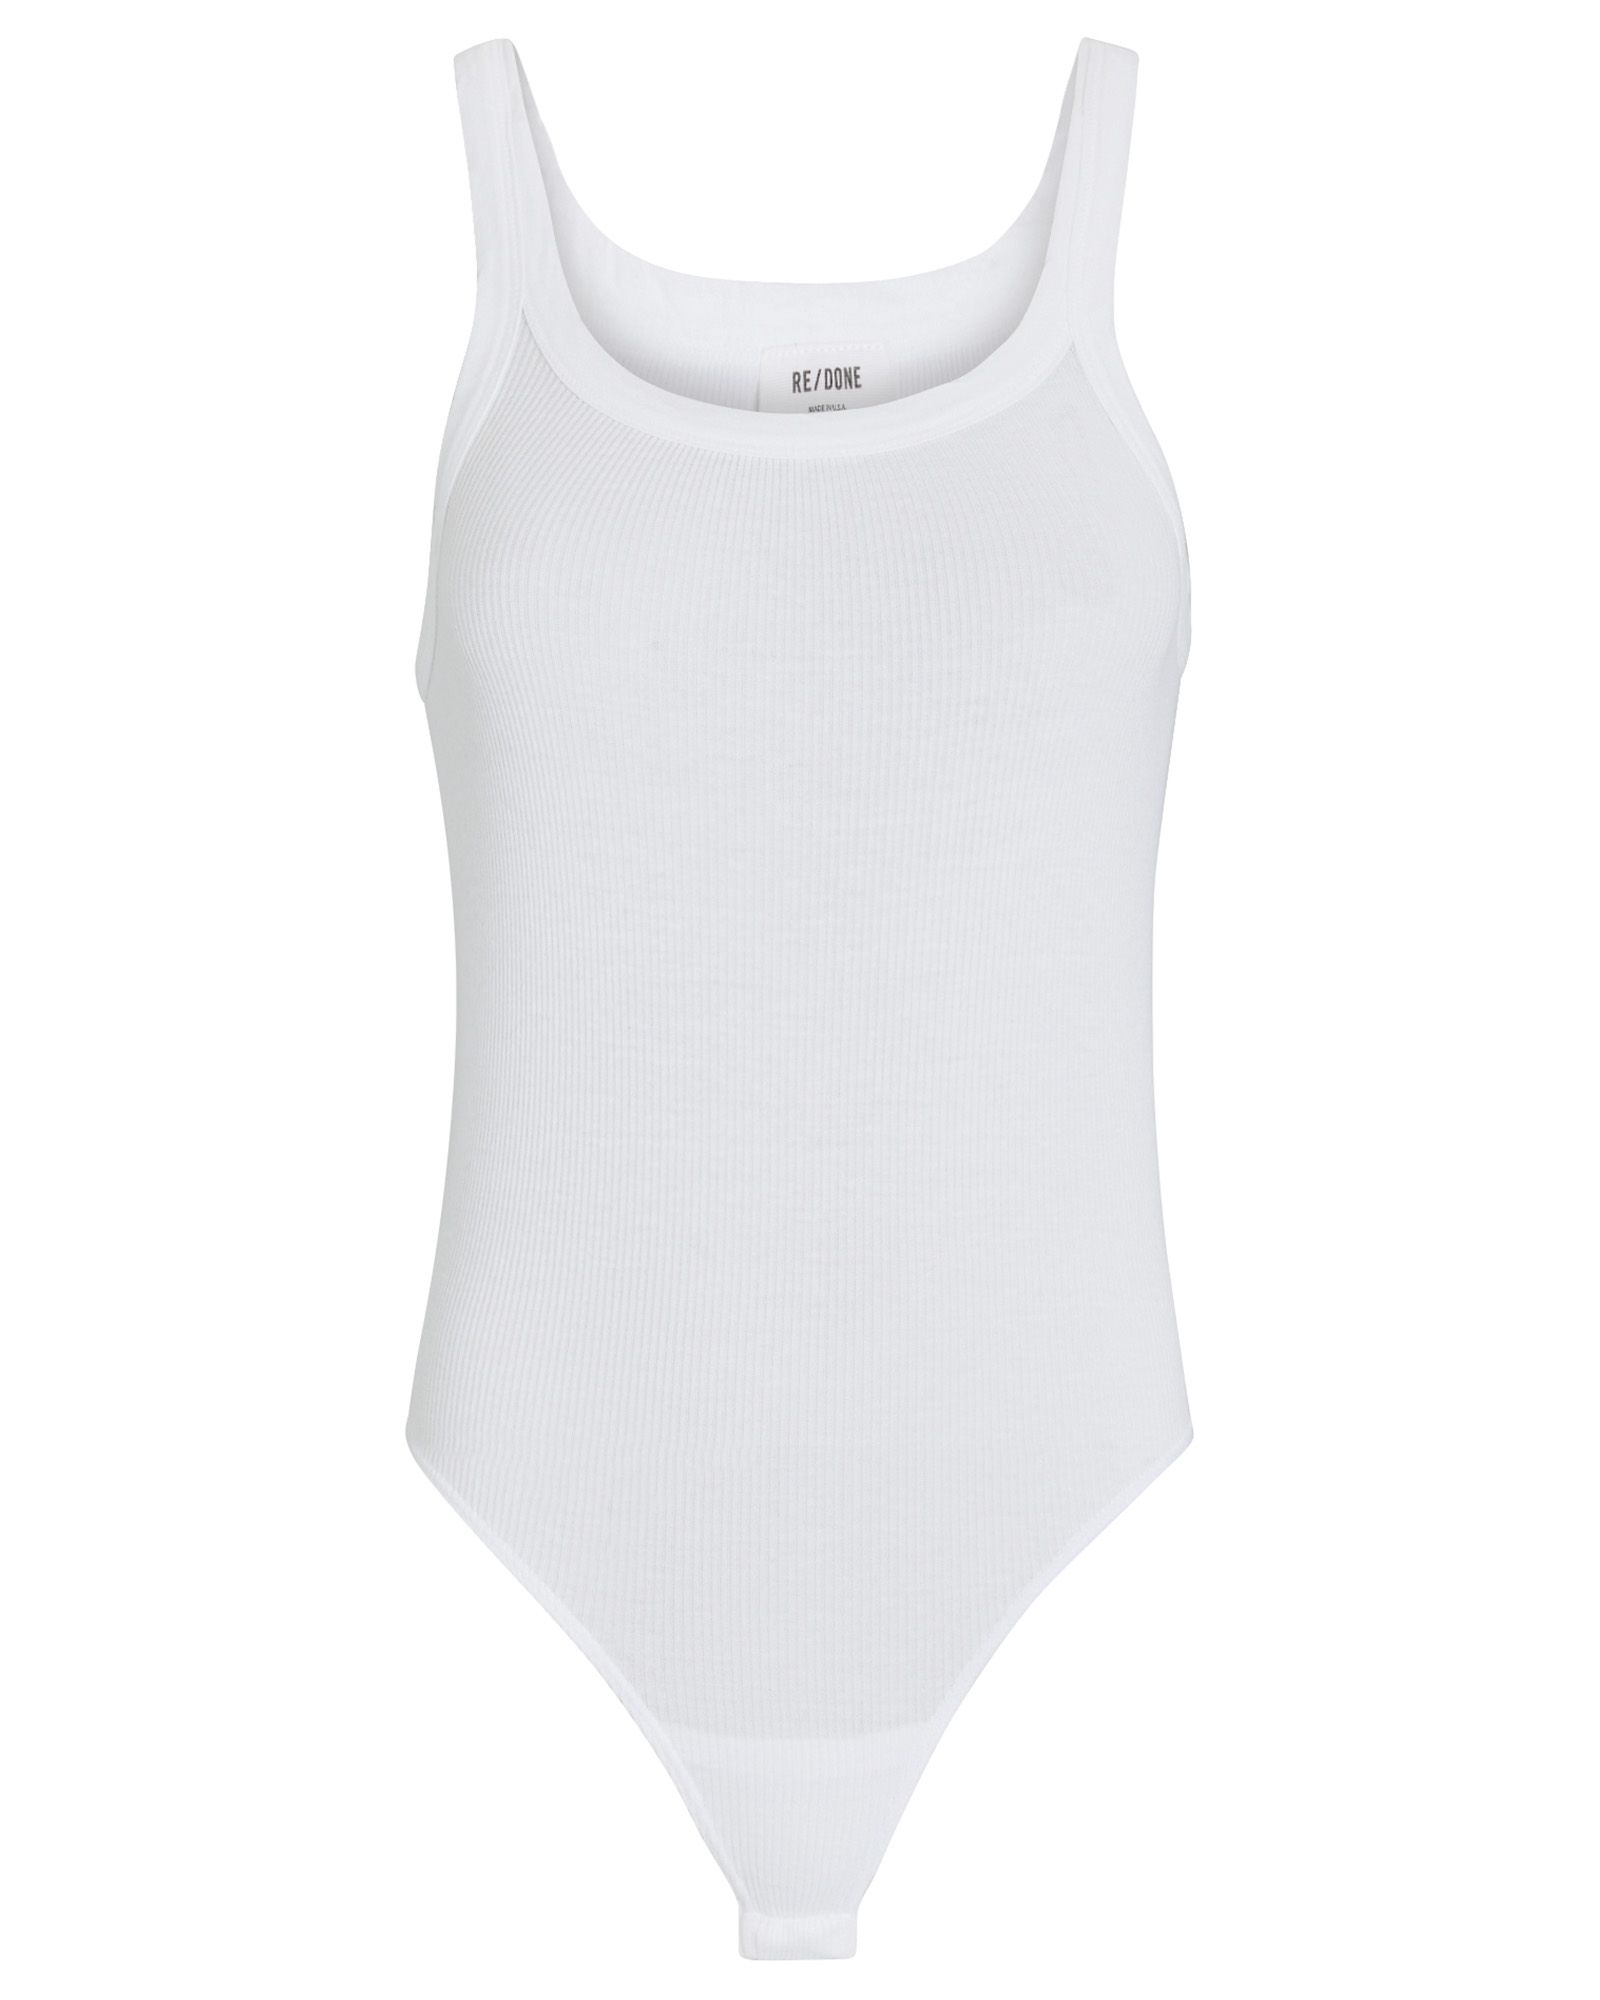 RE/DONE Ribbed Tank Bodysuit, White S | INTERMIX